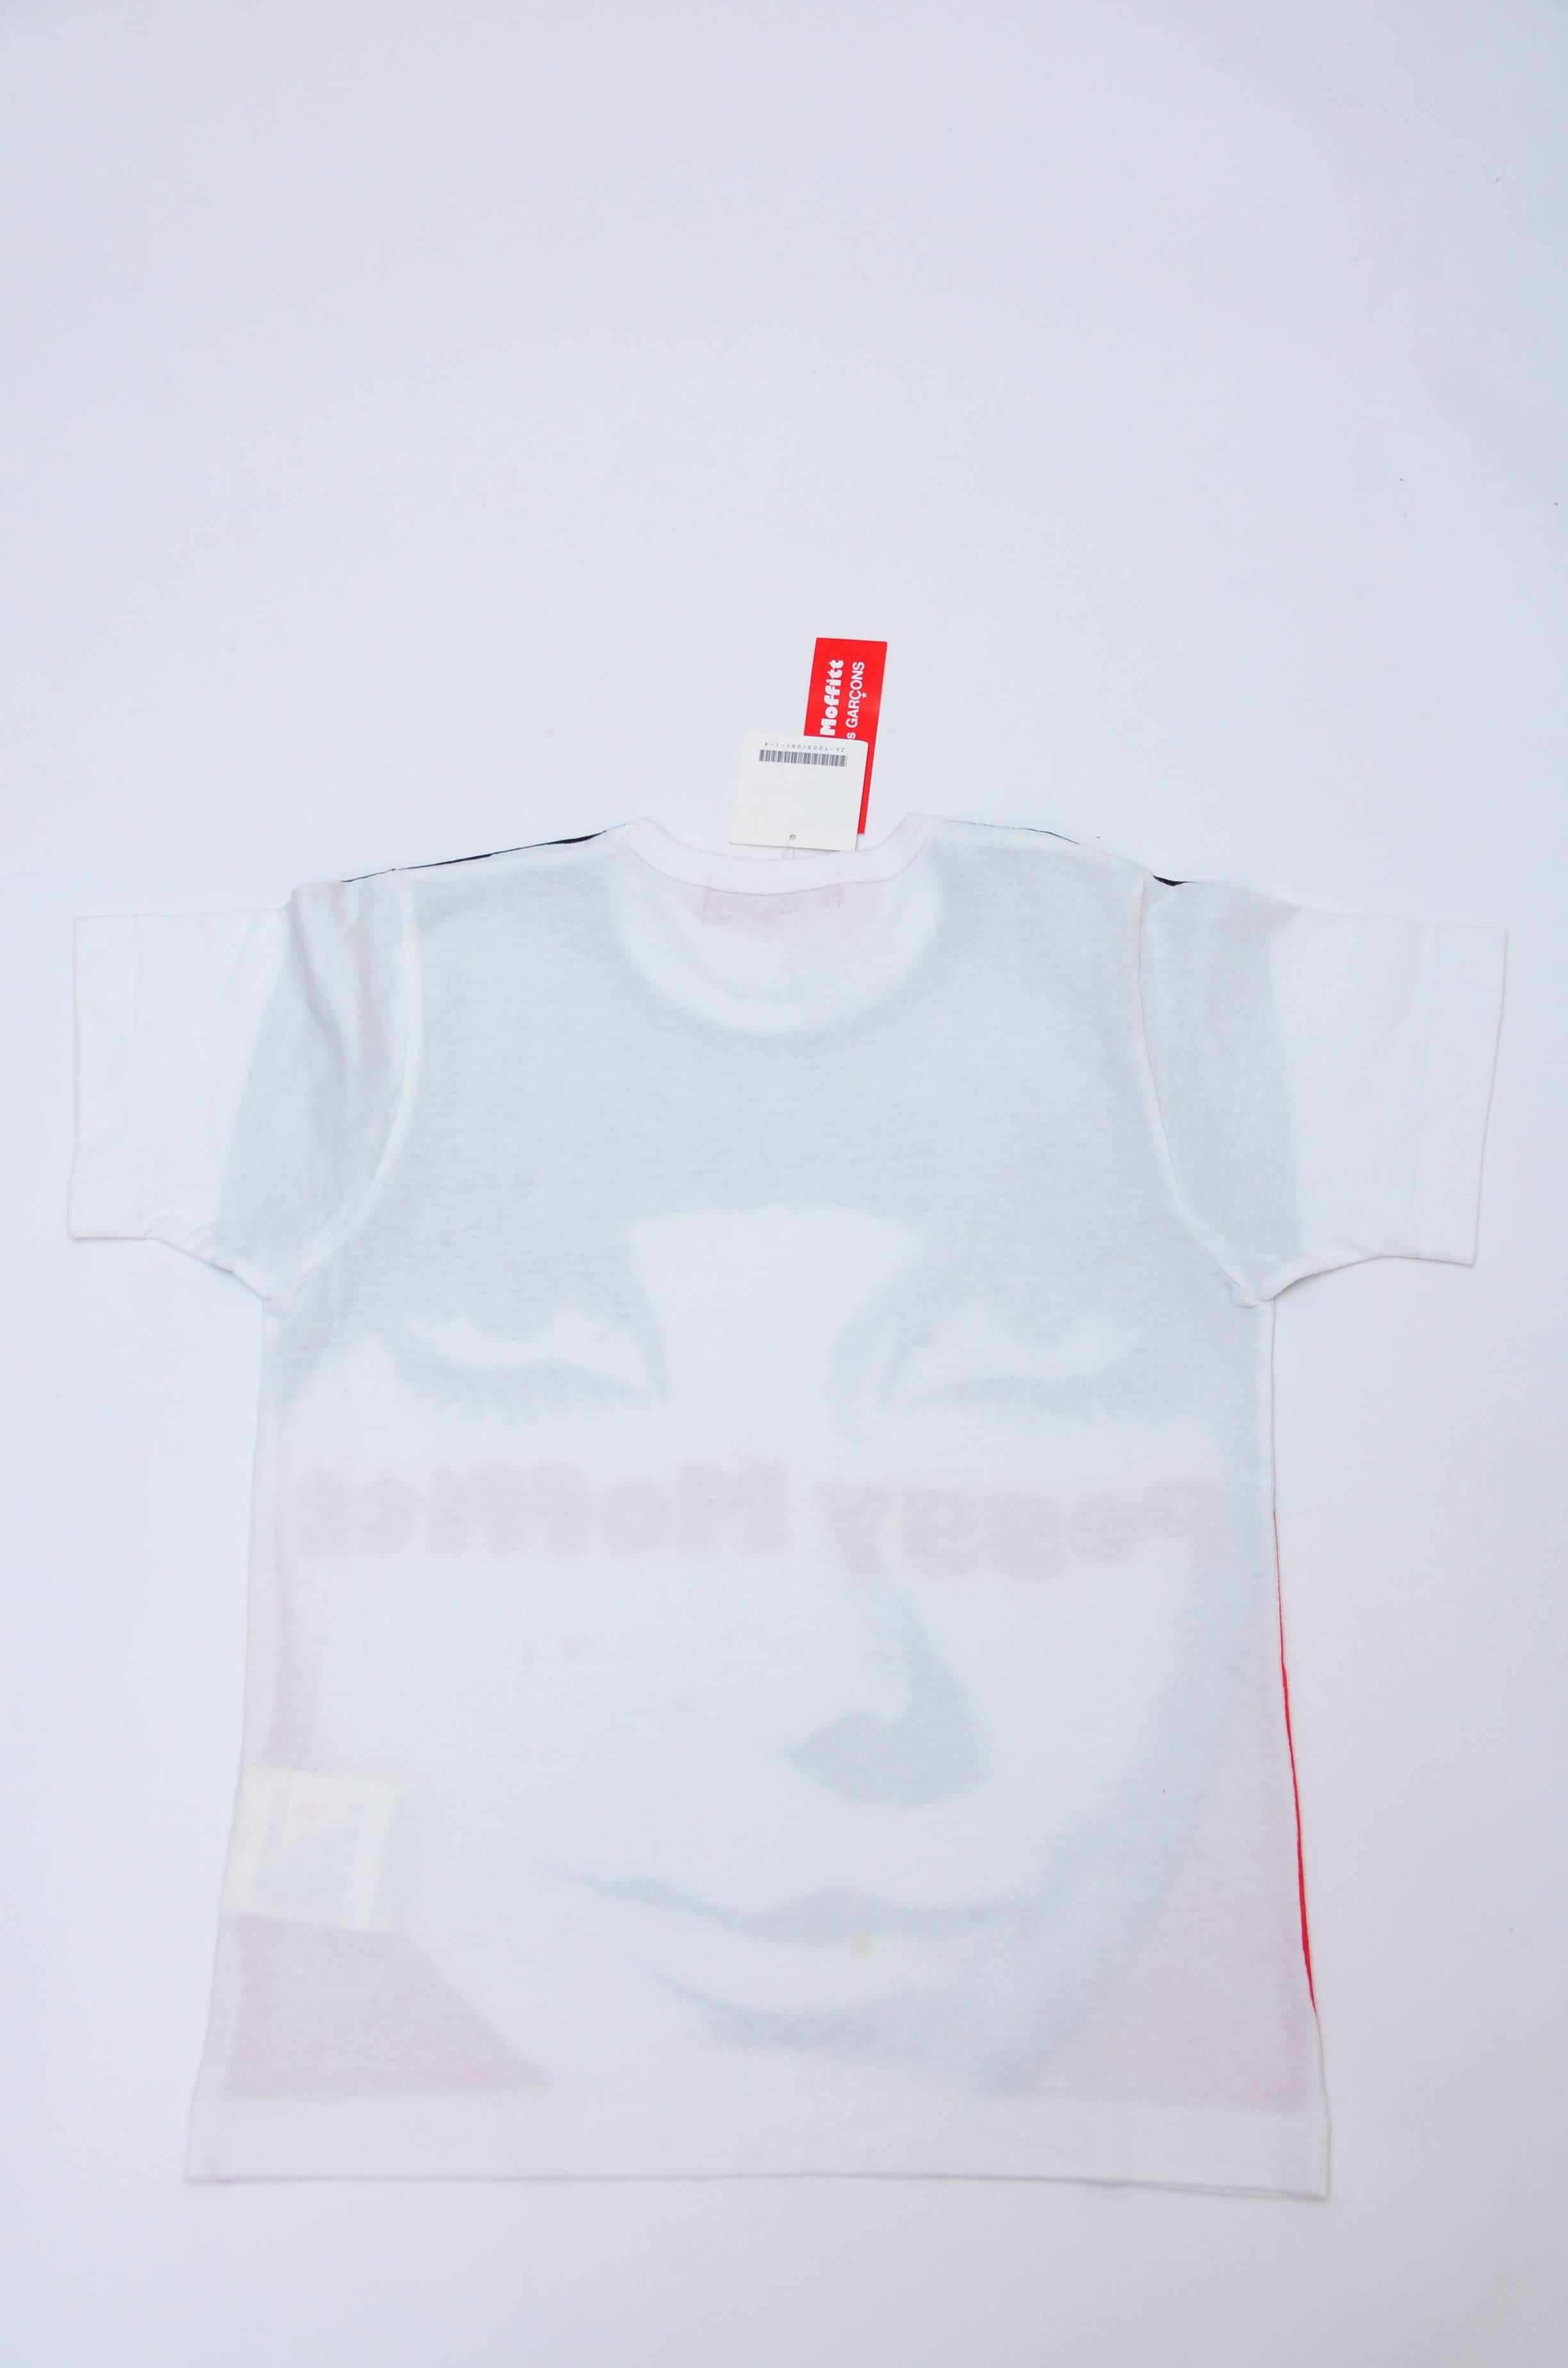 Peggy Moffitt Colaboration With Comme Des Garcon Shirt 2003  NEW  1